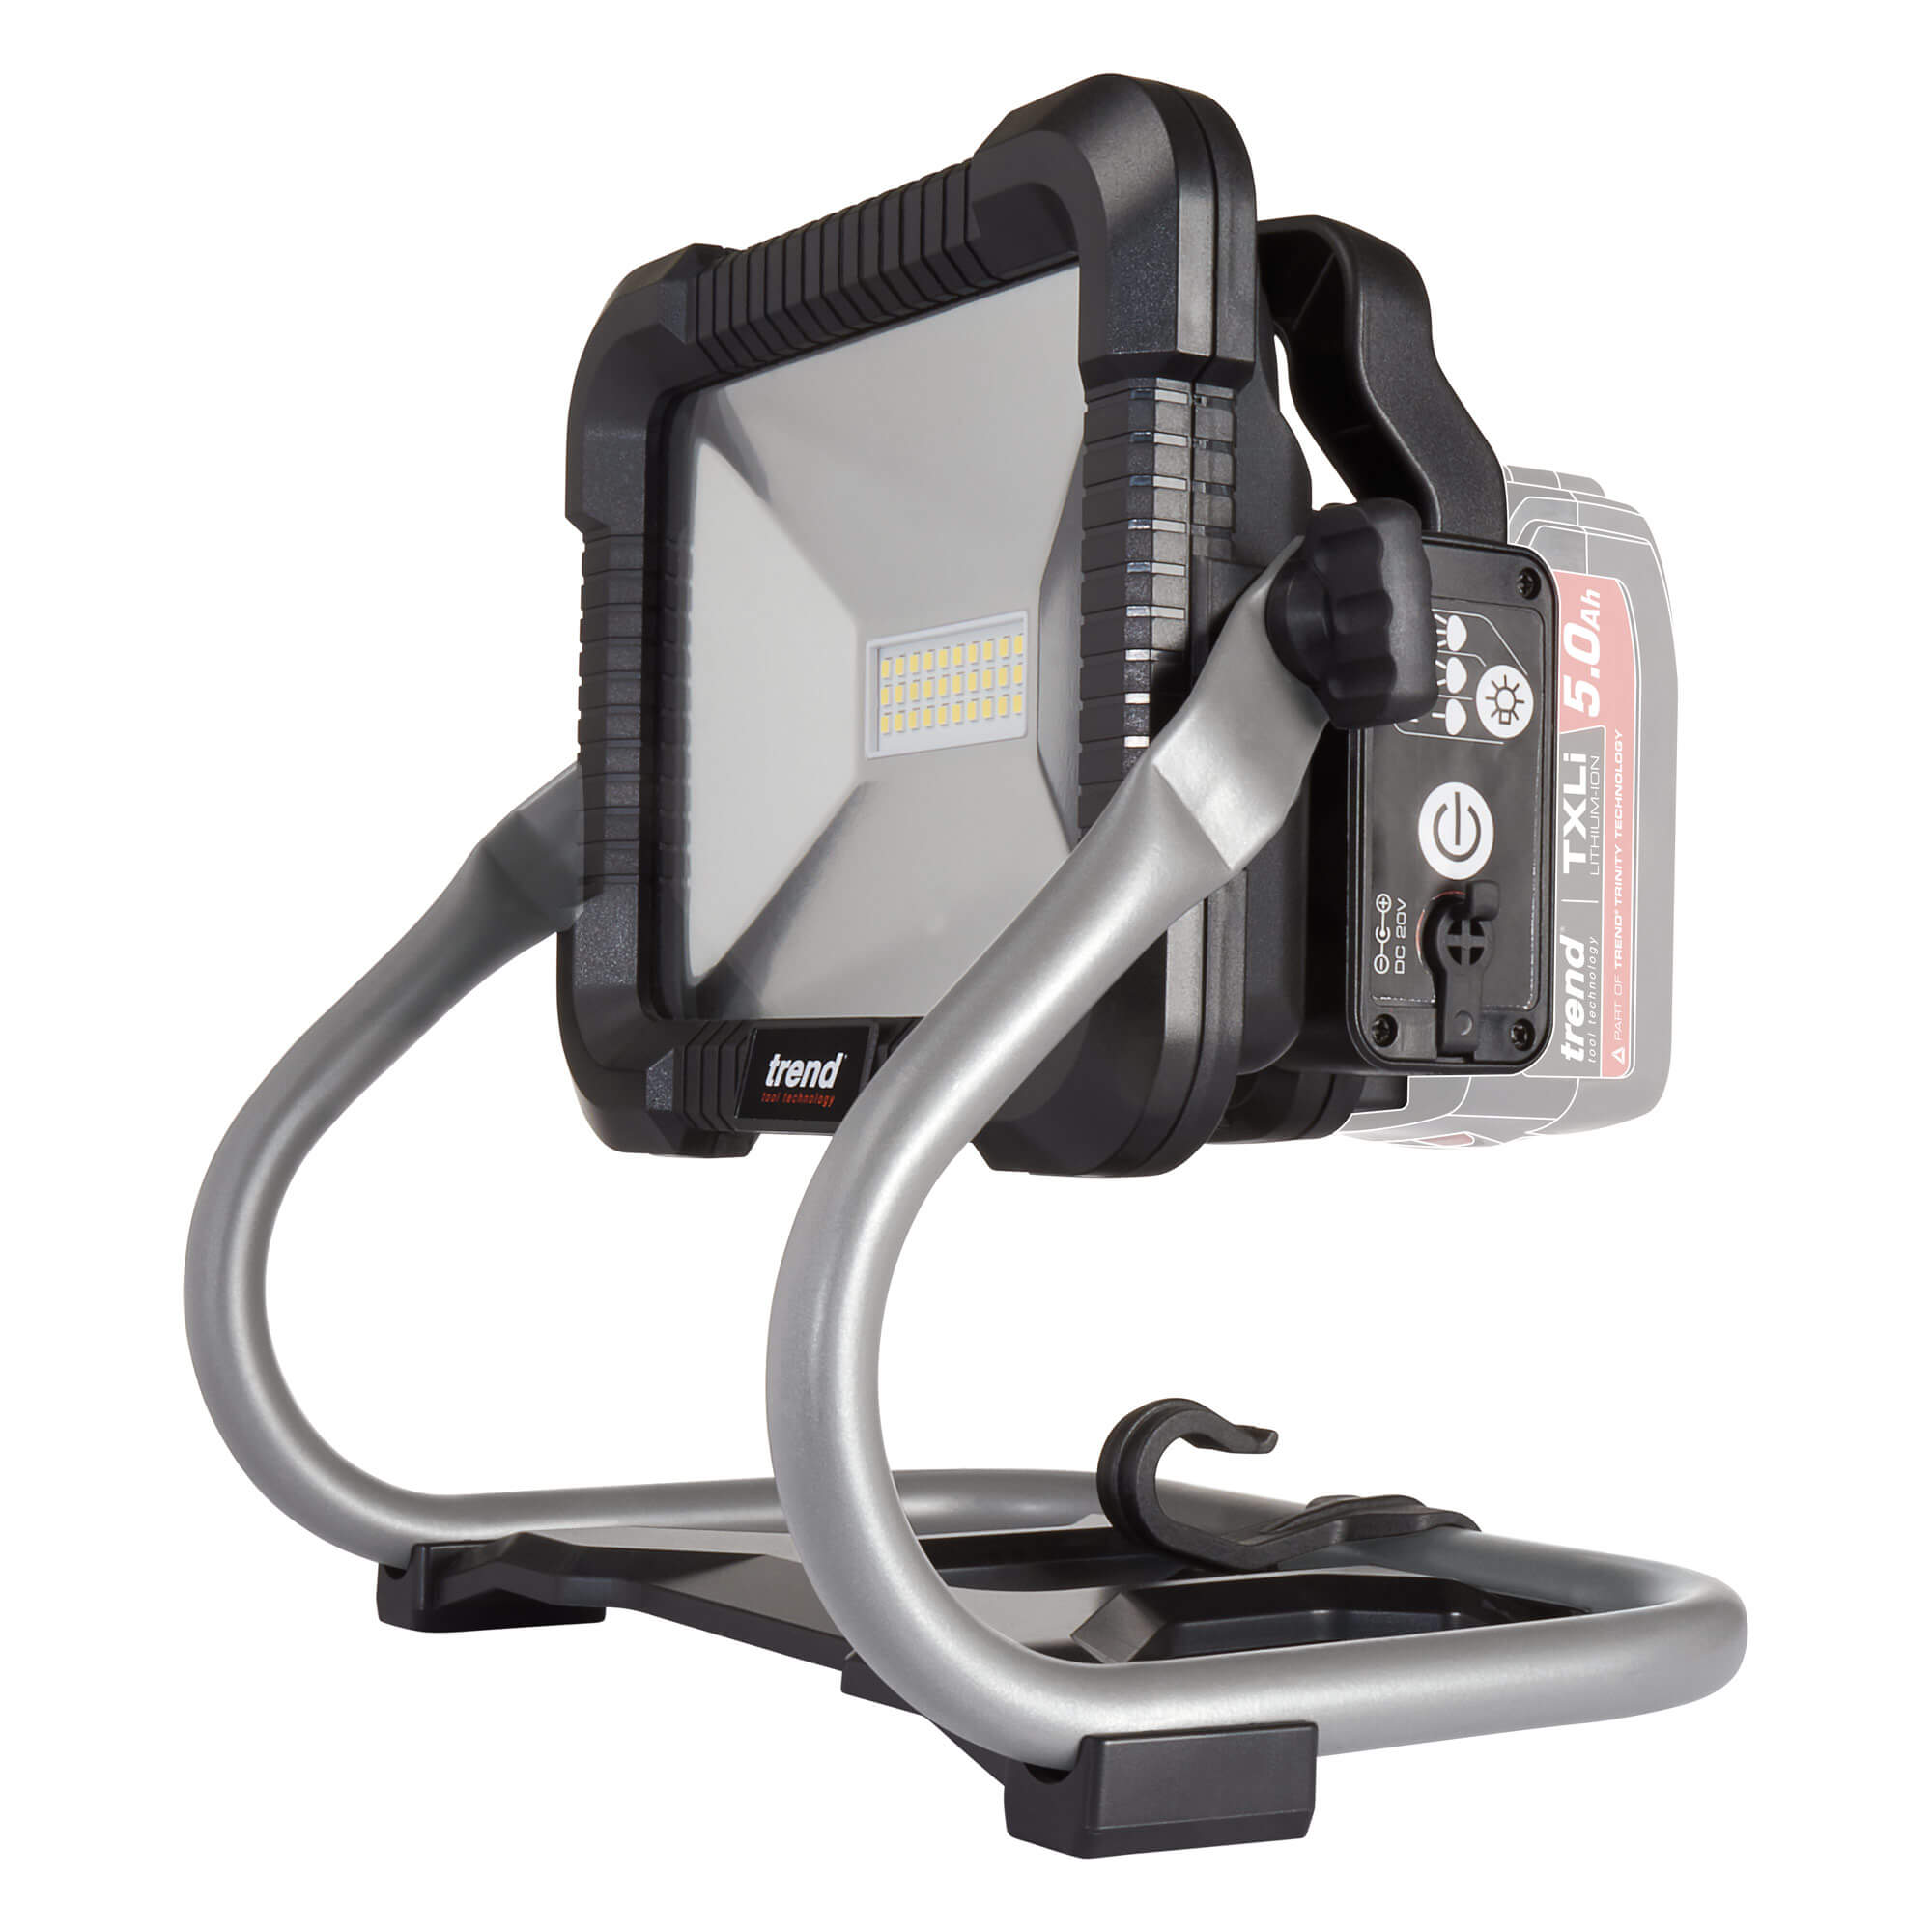 Image of Trend T18S/SLB 18v Cordless LED Area Work Light No Batteries No Charger No Case